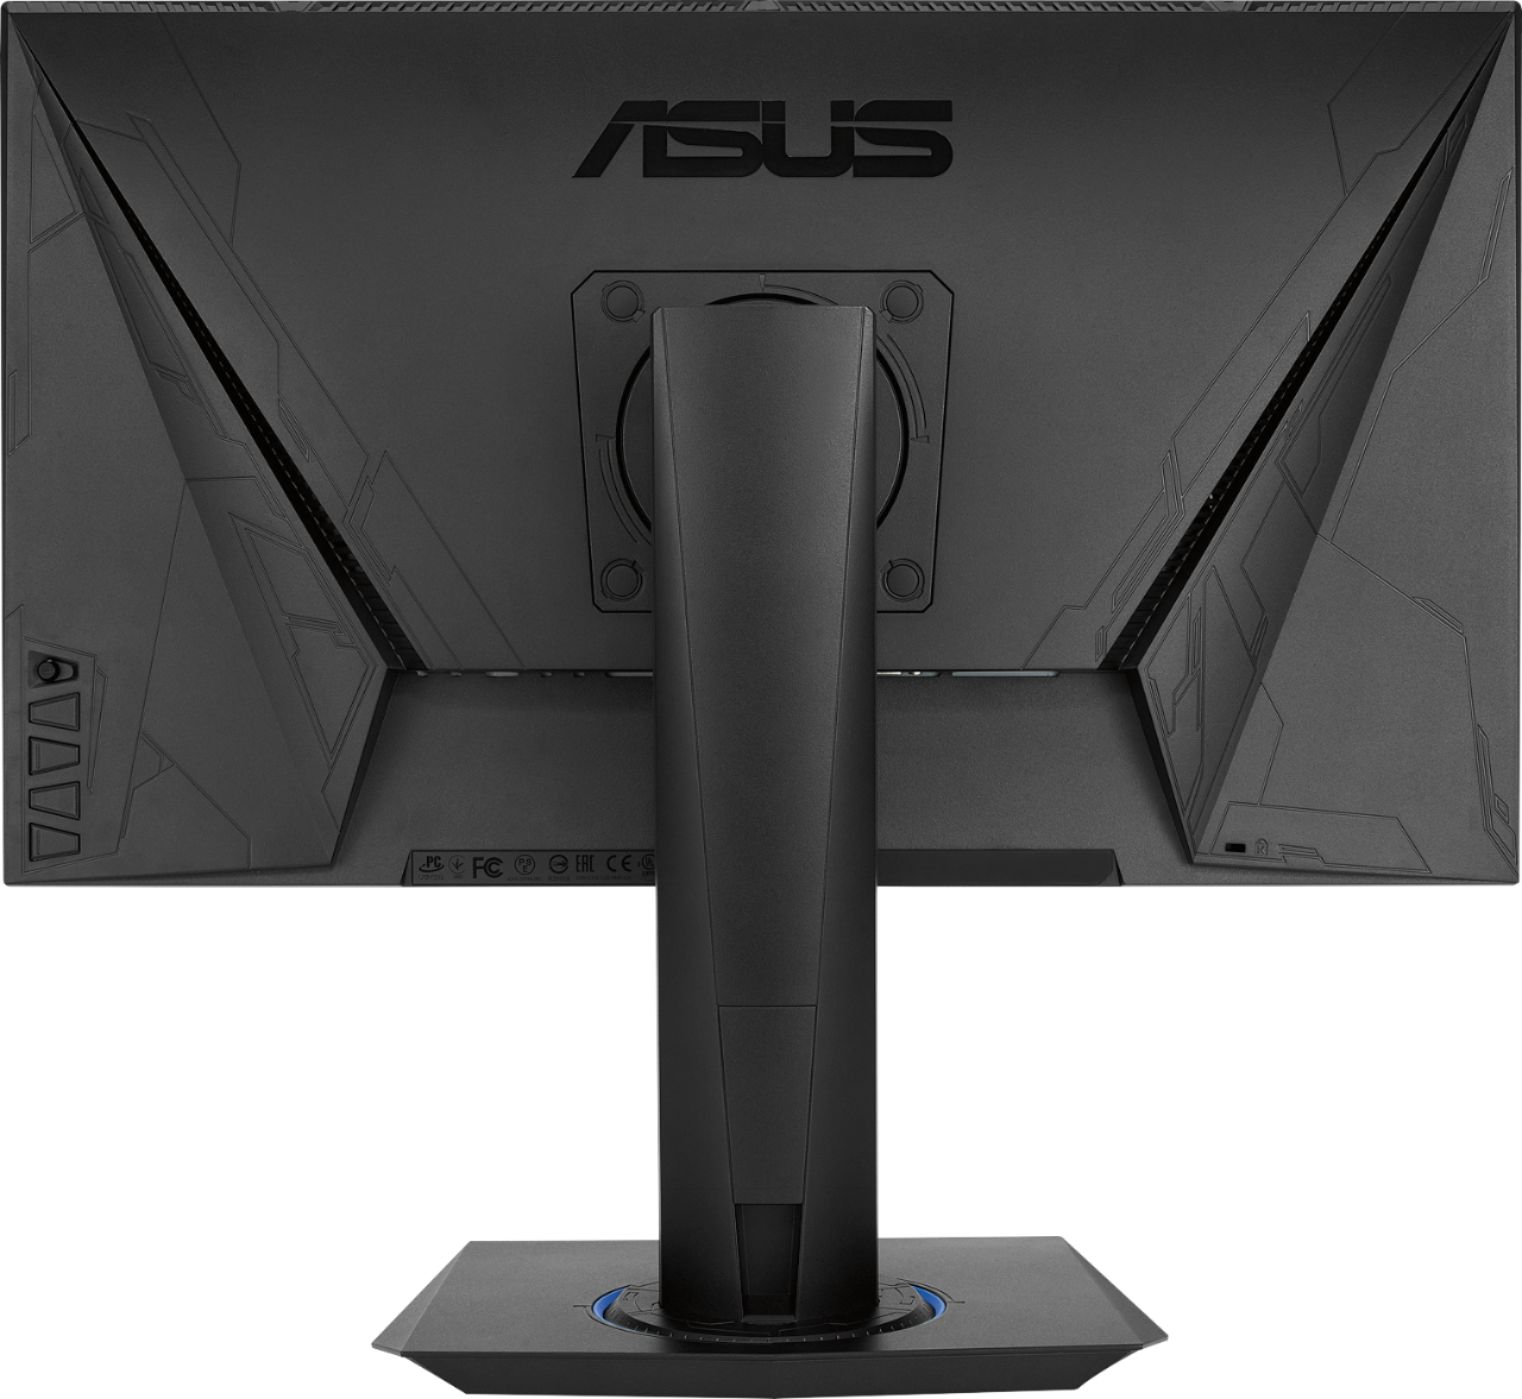 Back View: ASUS - Geek Squad Certified Refurbished 24" LED FHD FreeSync Monitor - Black